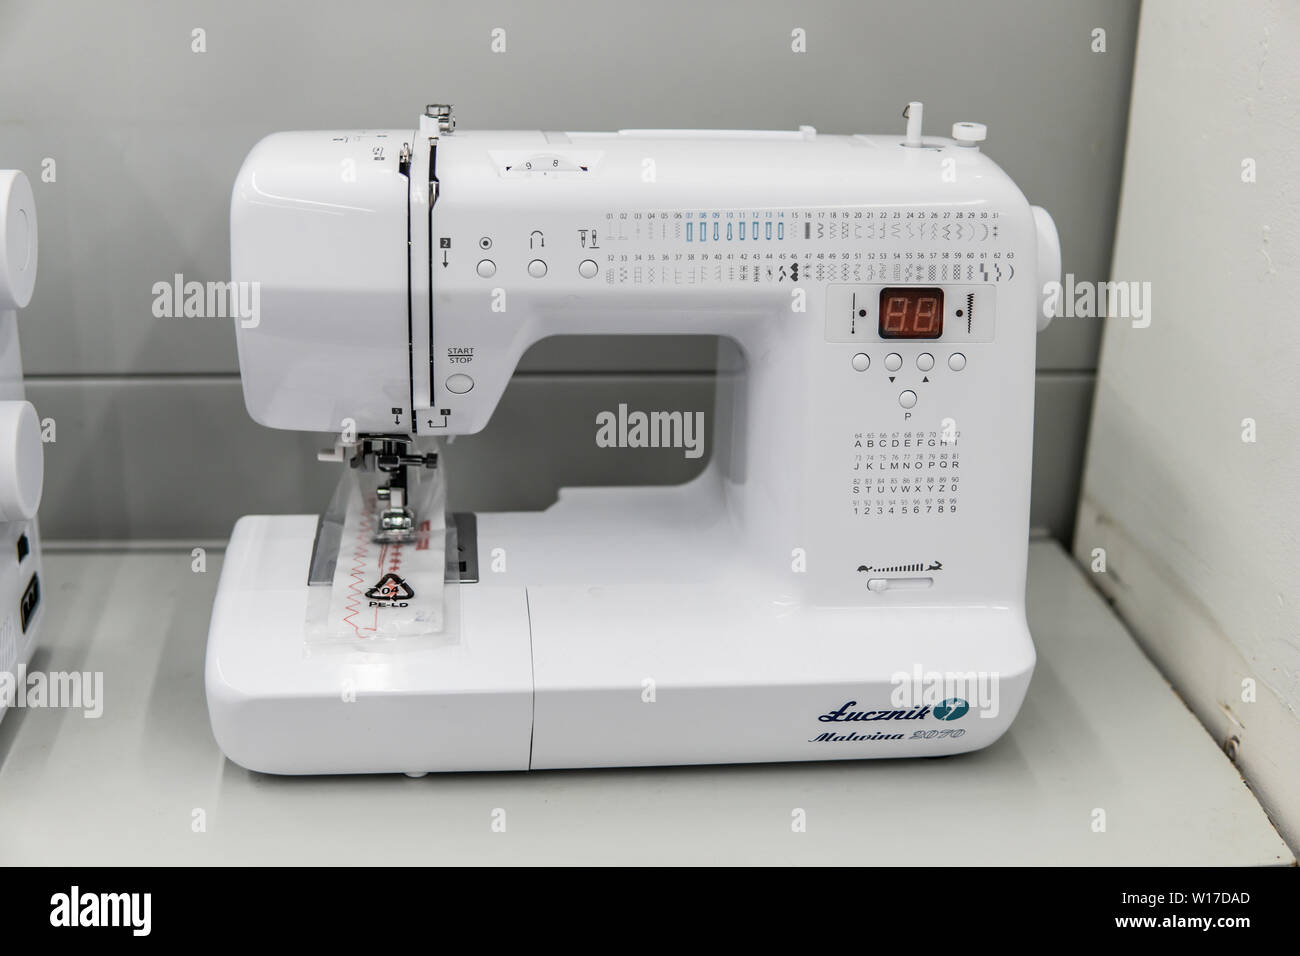 Lodz, Poland, July 9, 2018 inside Saturn electronic store, Sewing Machine  Lucznik on display for sale Stock Photo - Alamy